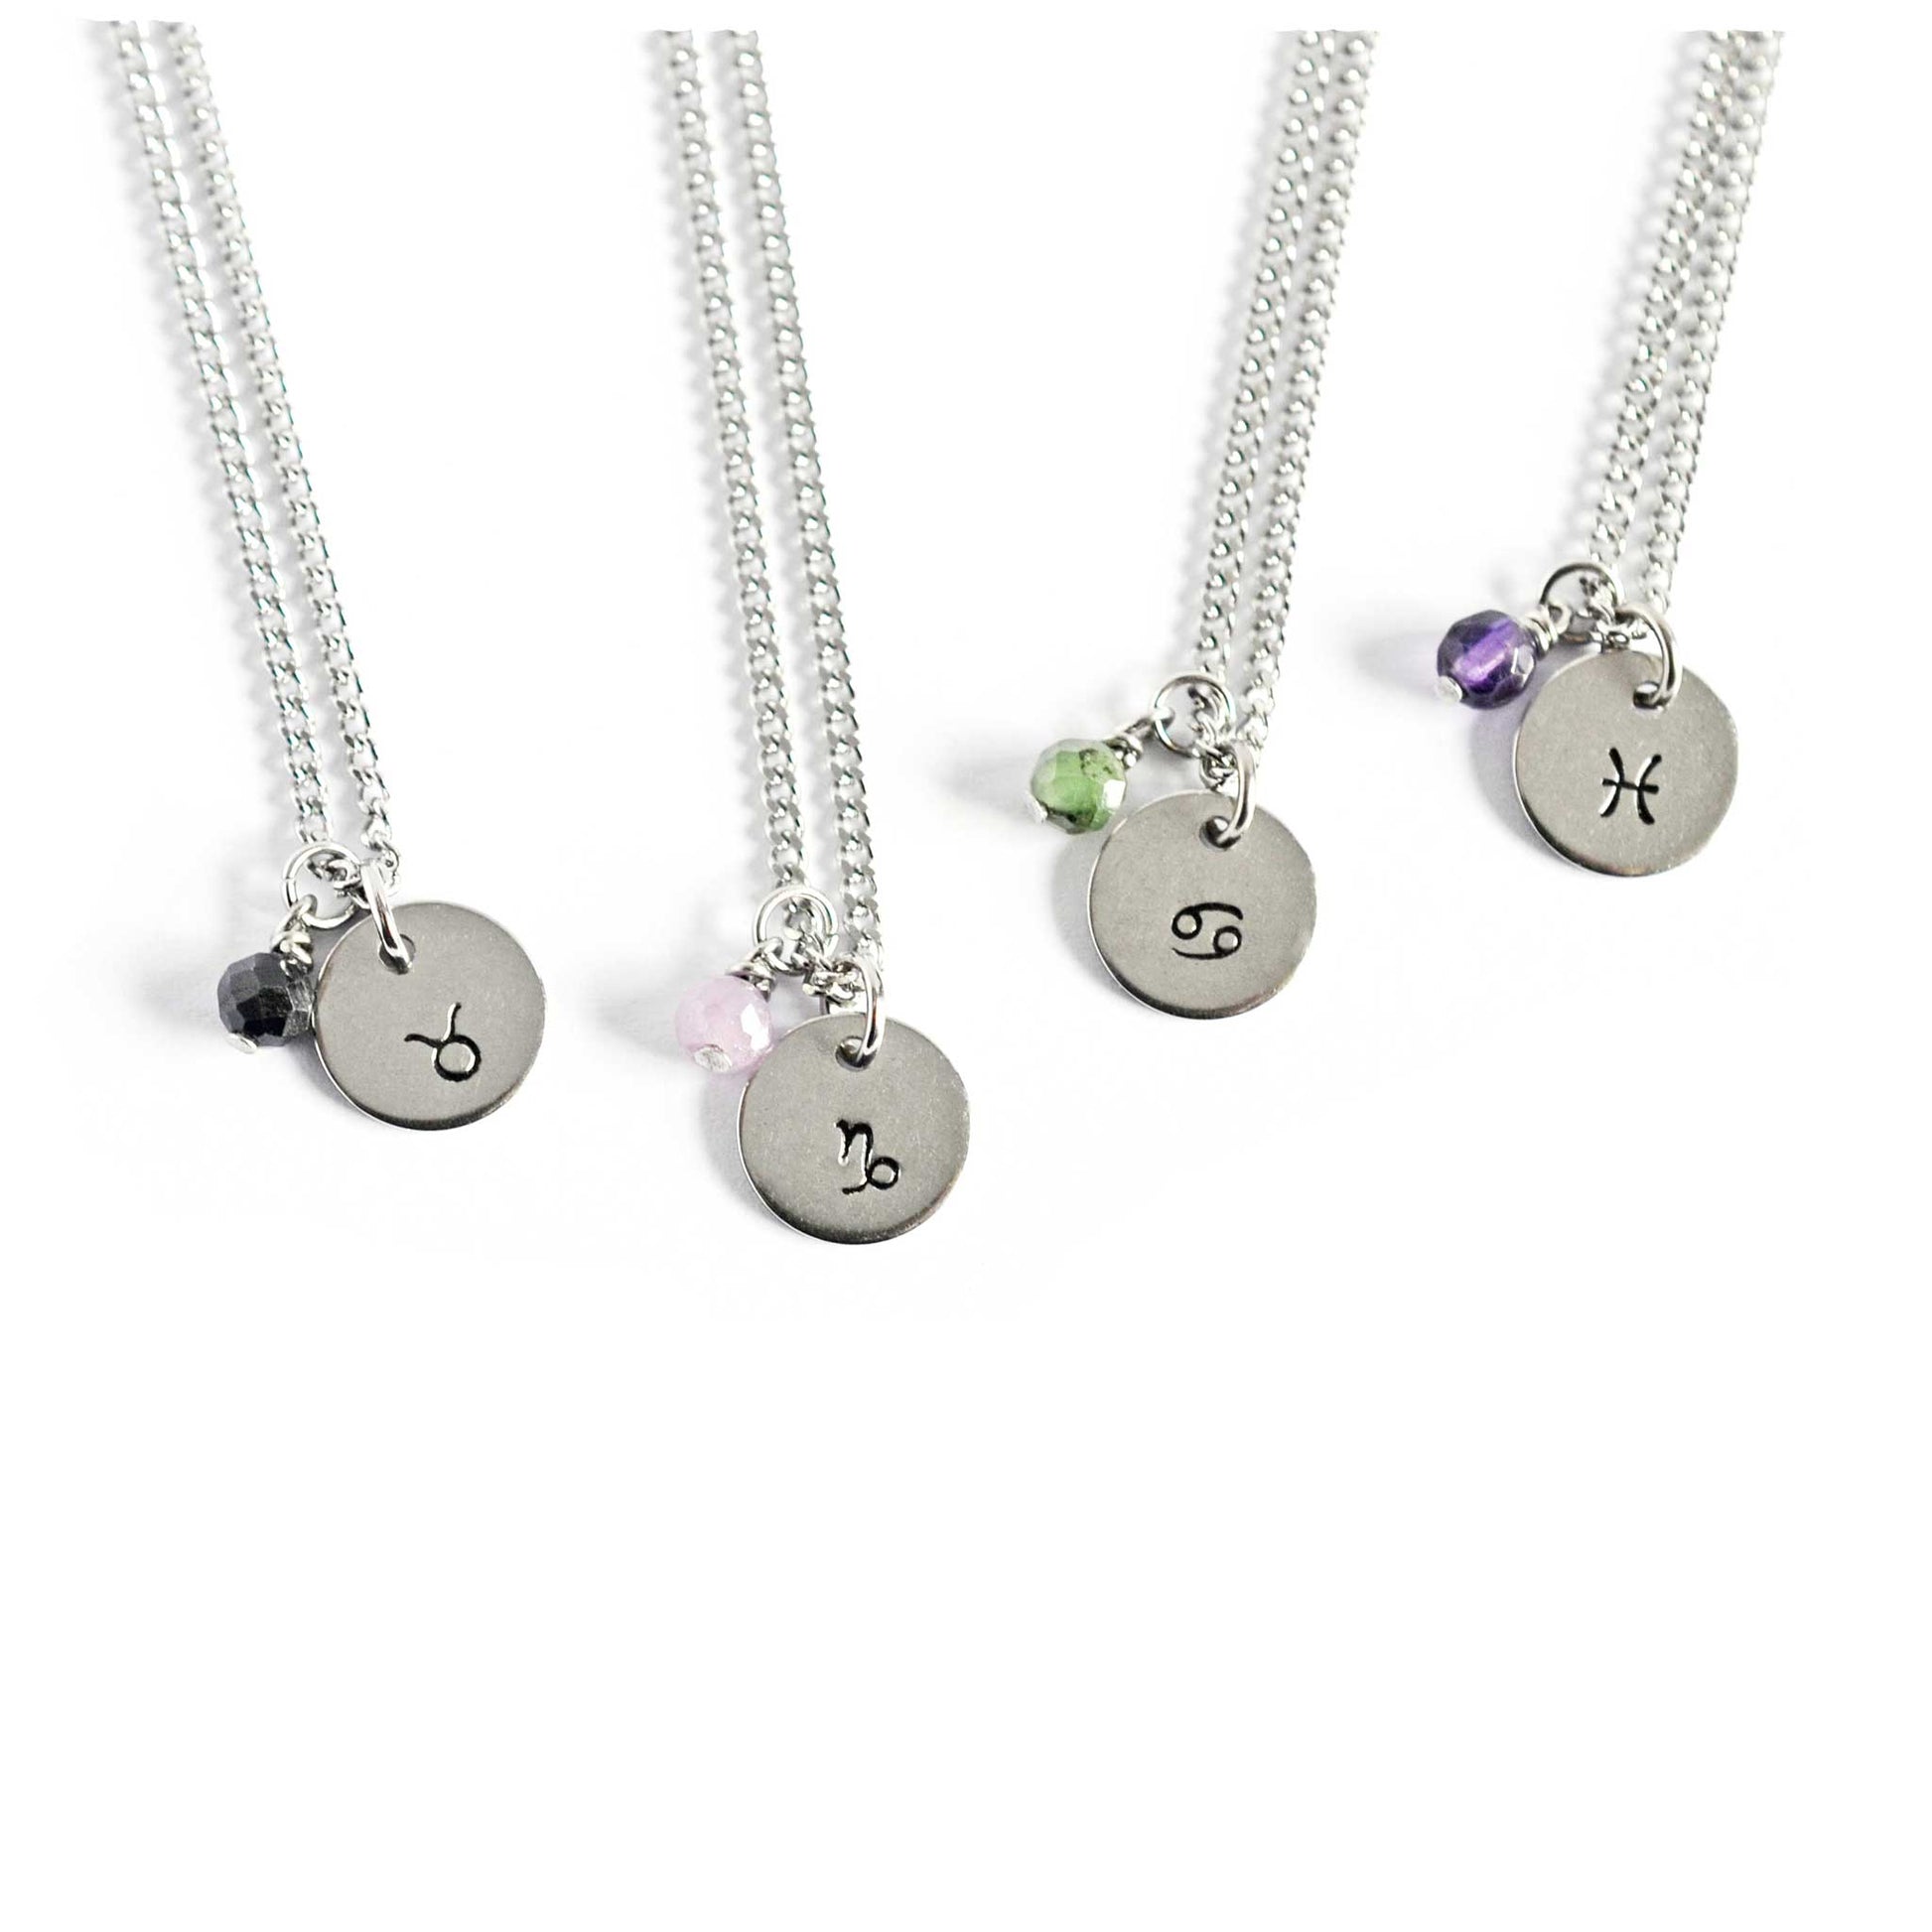 Necklace with zodiac sign and gemstone charm on white background